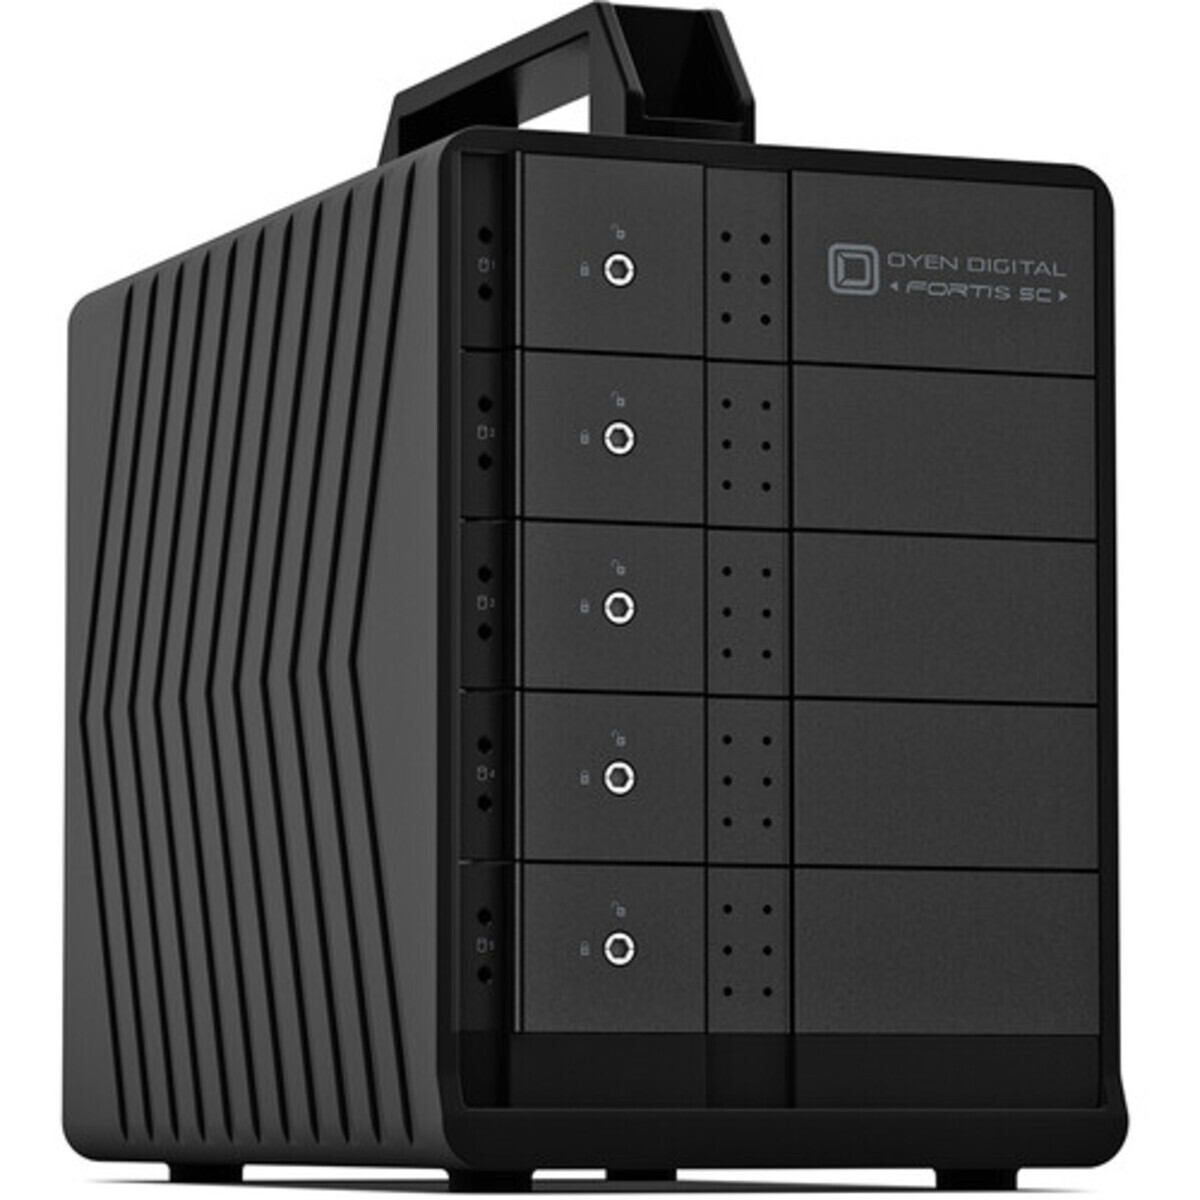 buy OYEN Fortis 5C 110tb Desktop DAS - Direct Attached Storage Device 5x22000gb Western Digital Red Pro WD221KFGX 3.5 7200rpm SATA 6Gb/s HDD NAS Class Drives Installed - Burn-In Tested - nas headquarters buy network attached storage server device das new raid-5 free shipping usa spring sale Fortis 5C